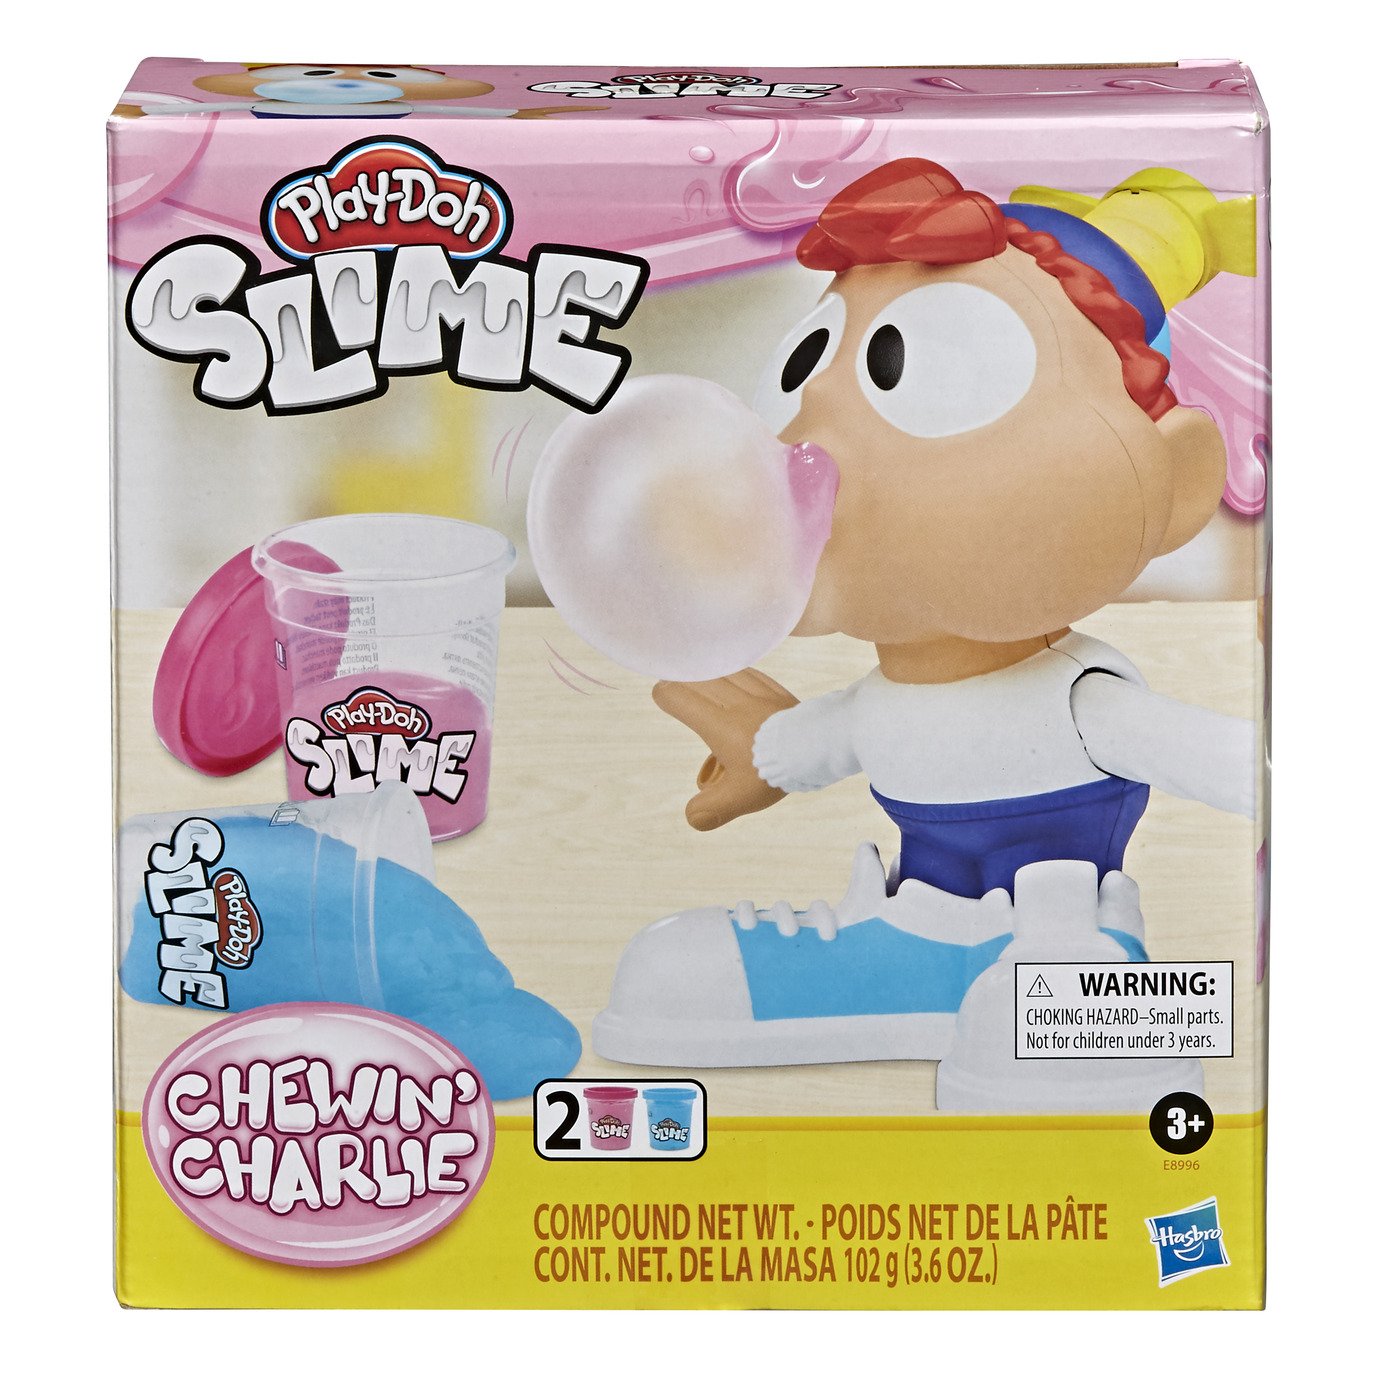 Play-Doh Slime Chewin' Charlie Slime Bubble Maker Toy Review